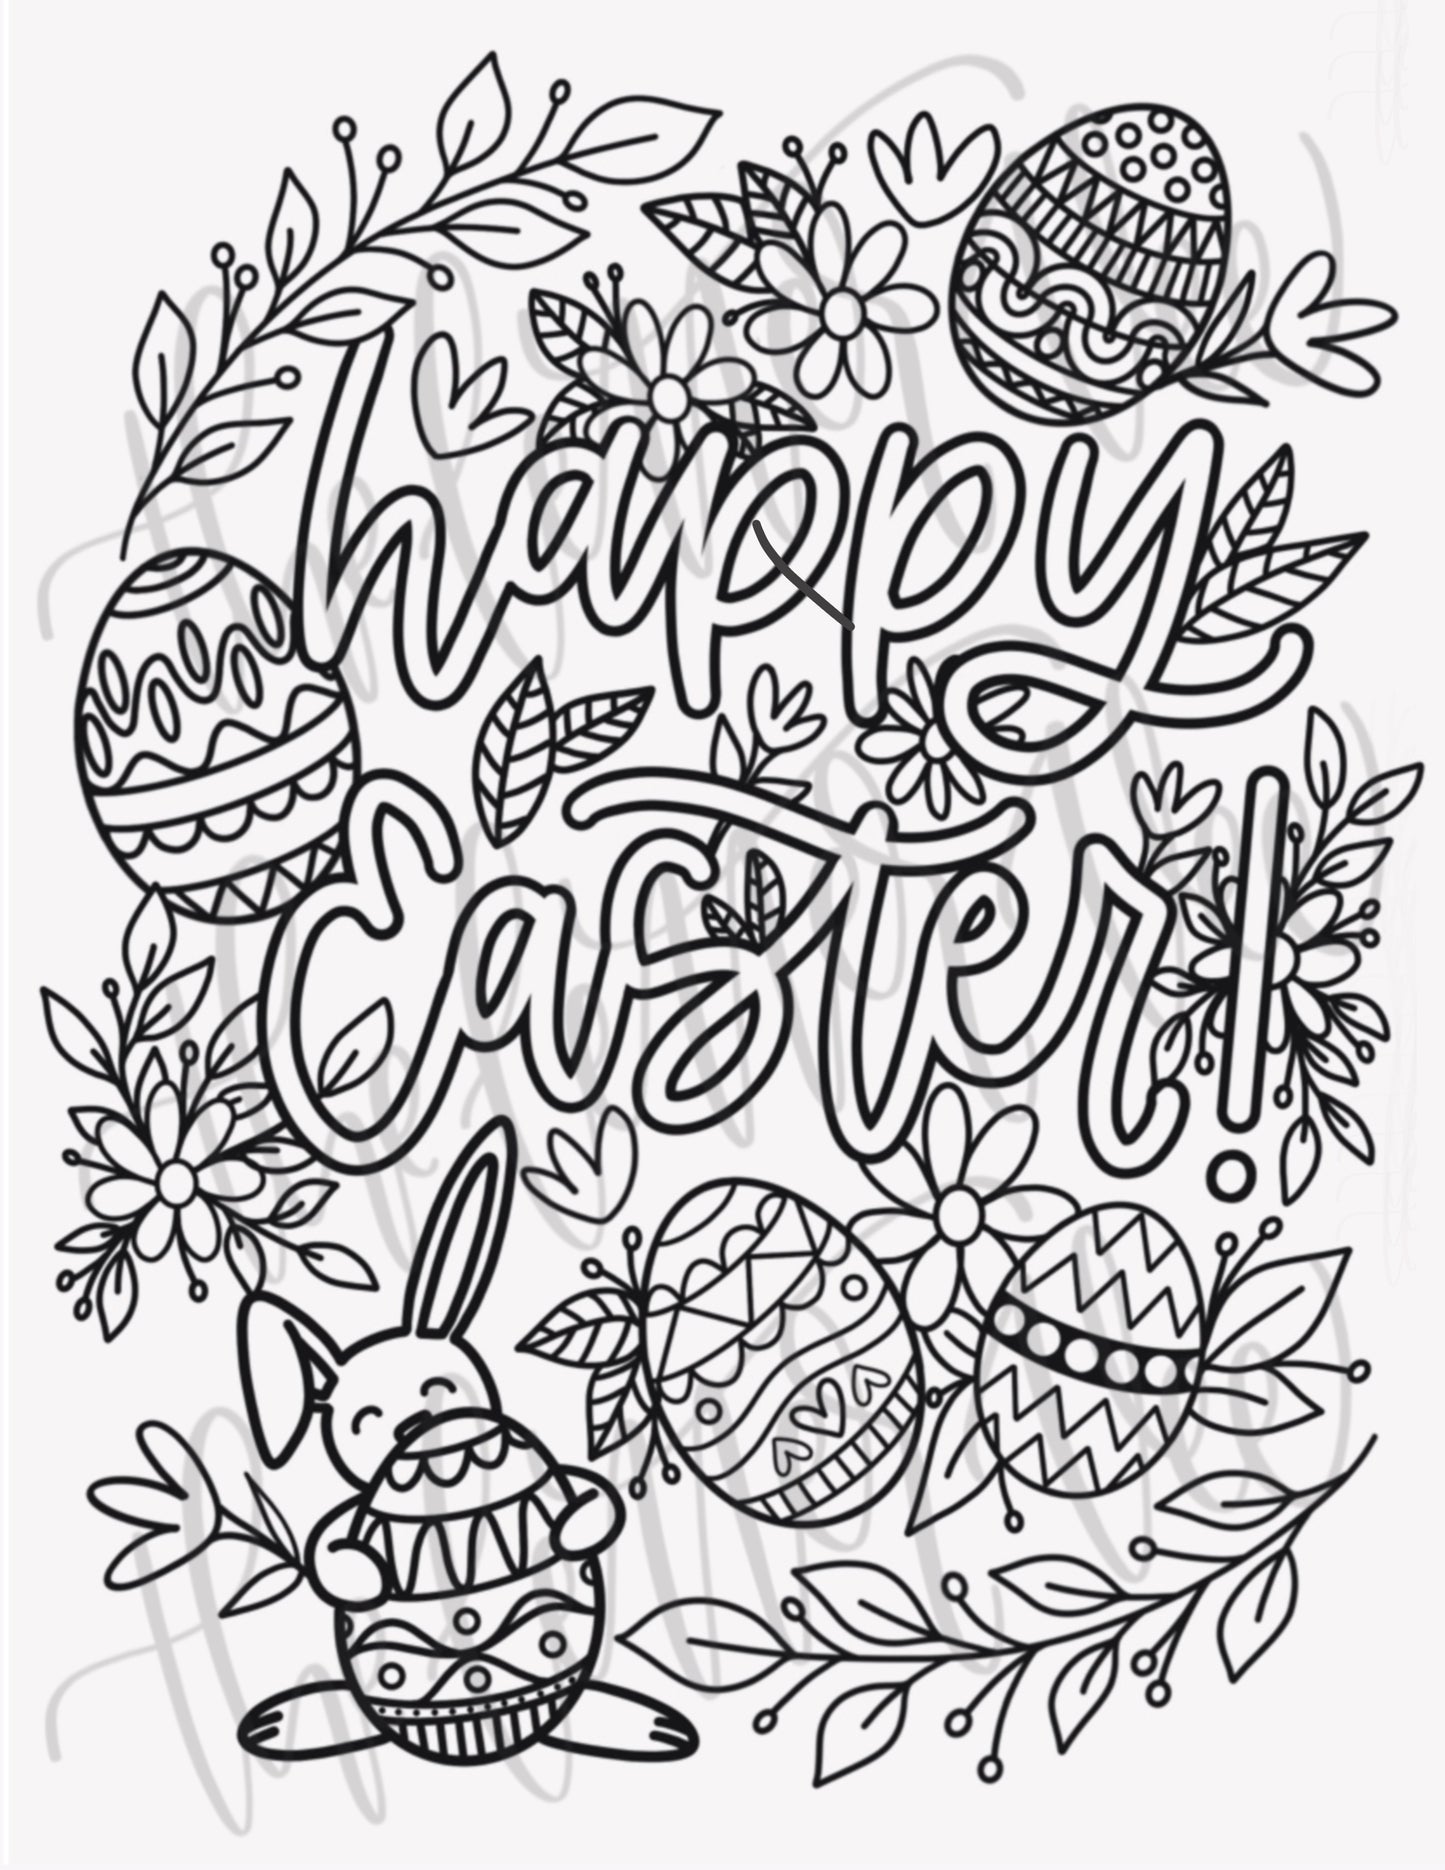 Happy Easter Coloring Sheet | FREE